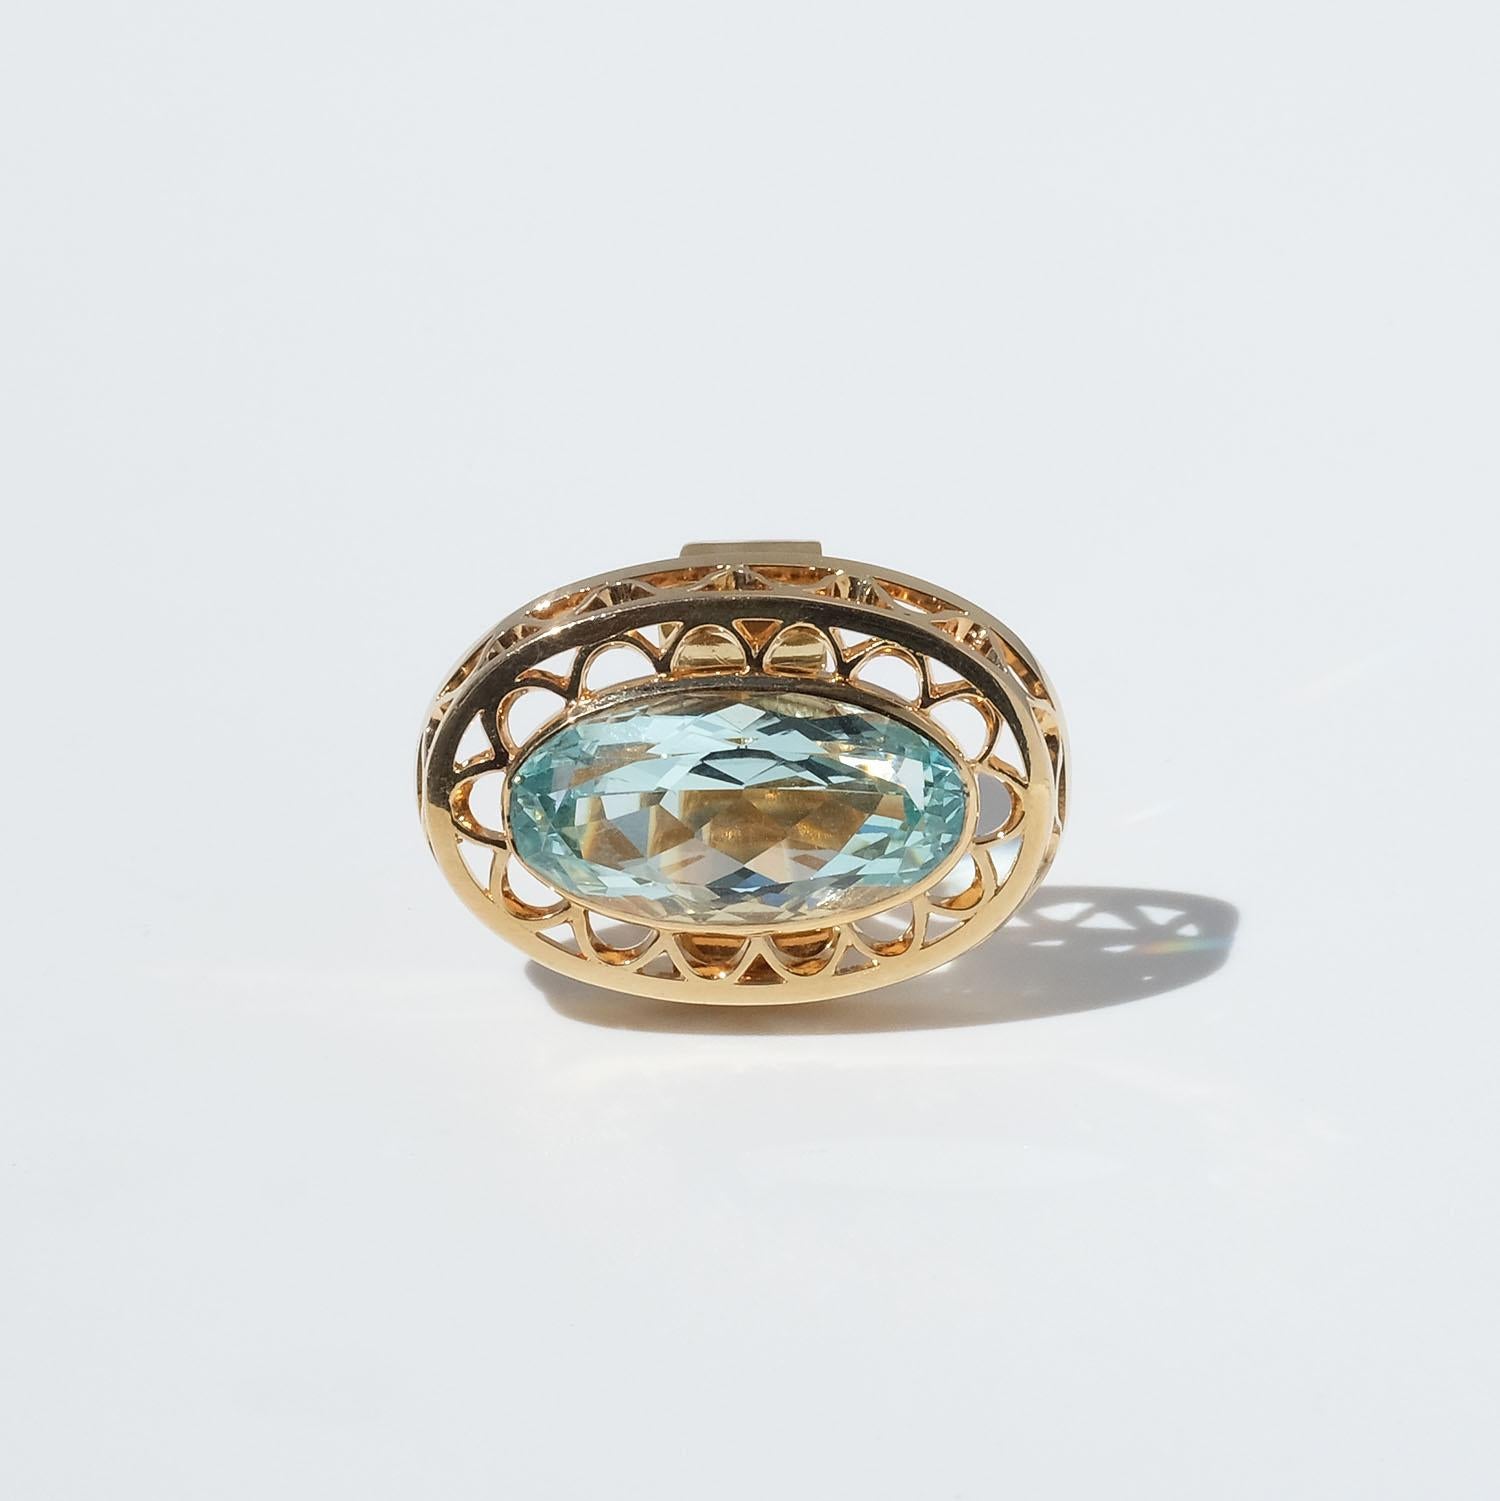 Vintage 18k Gold and Aquamarine Ring by Master Anders Högberg Year, 1977 For Sale 5